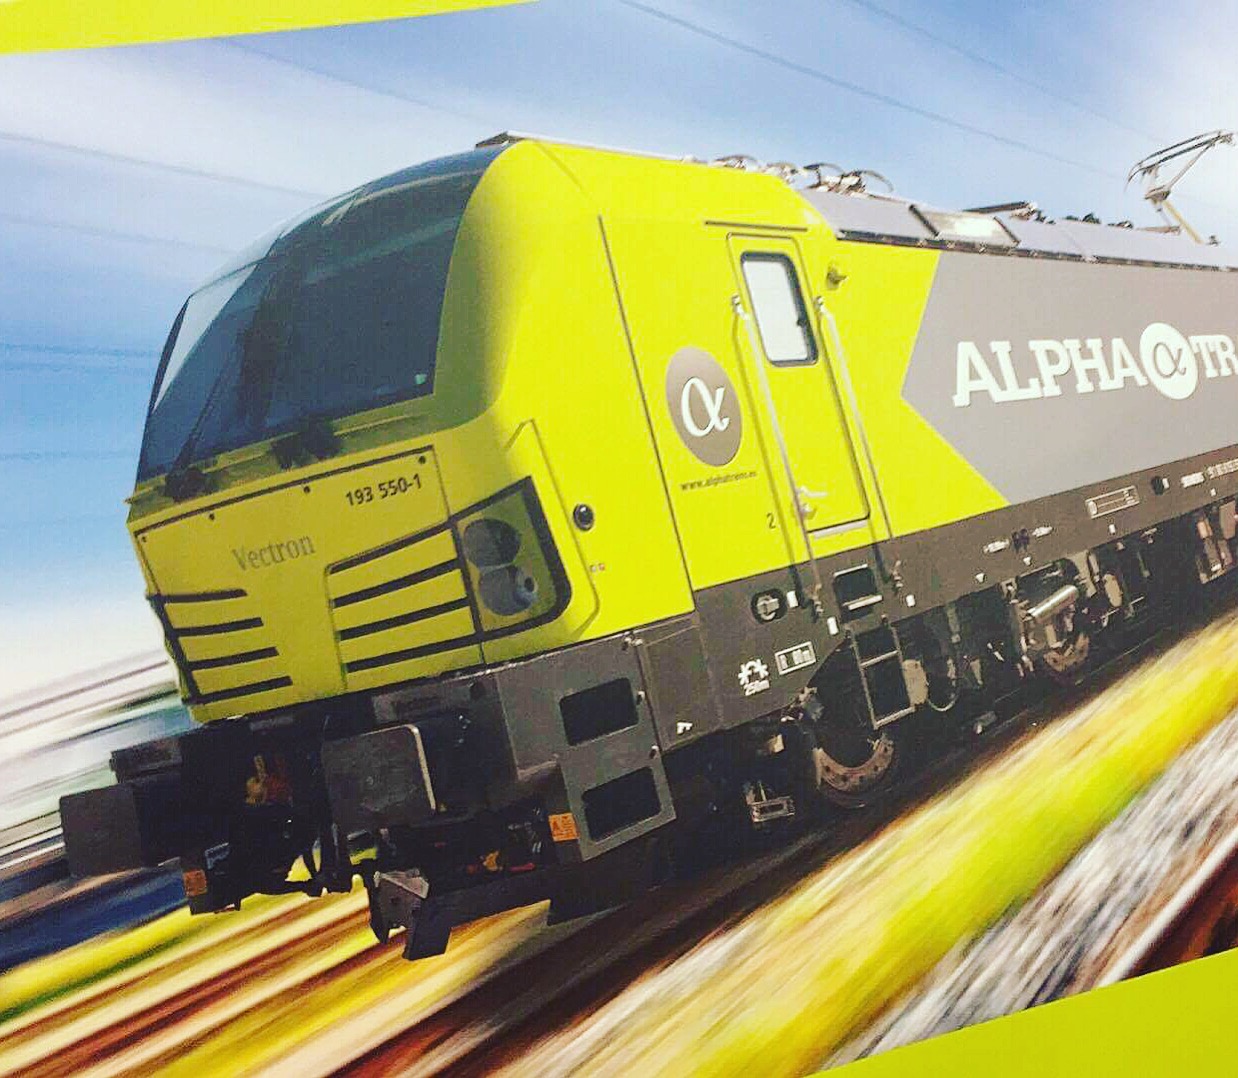 Artist impression of Alpha Trains Vectron. 193 550 is the correct number for the first locomotive.